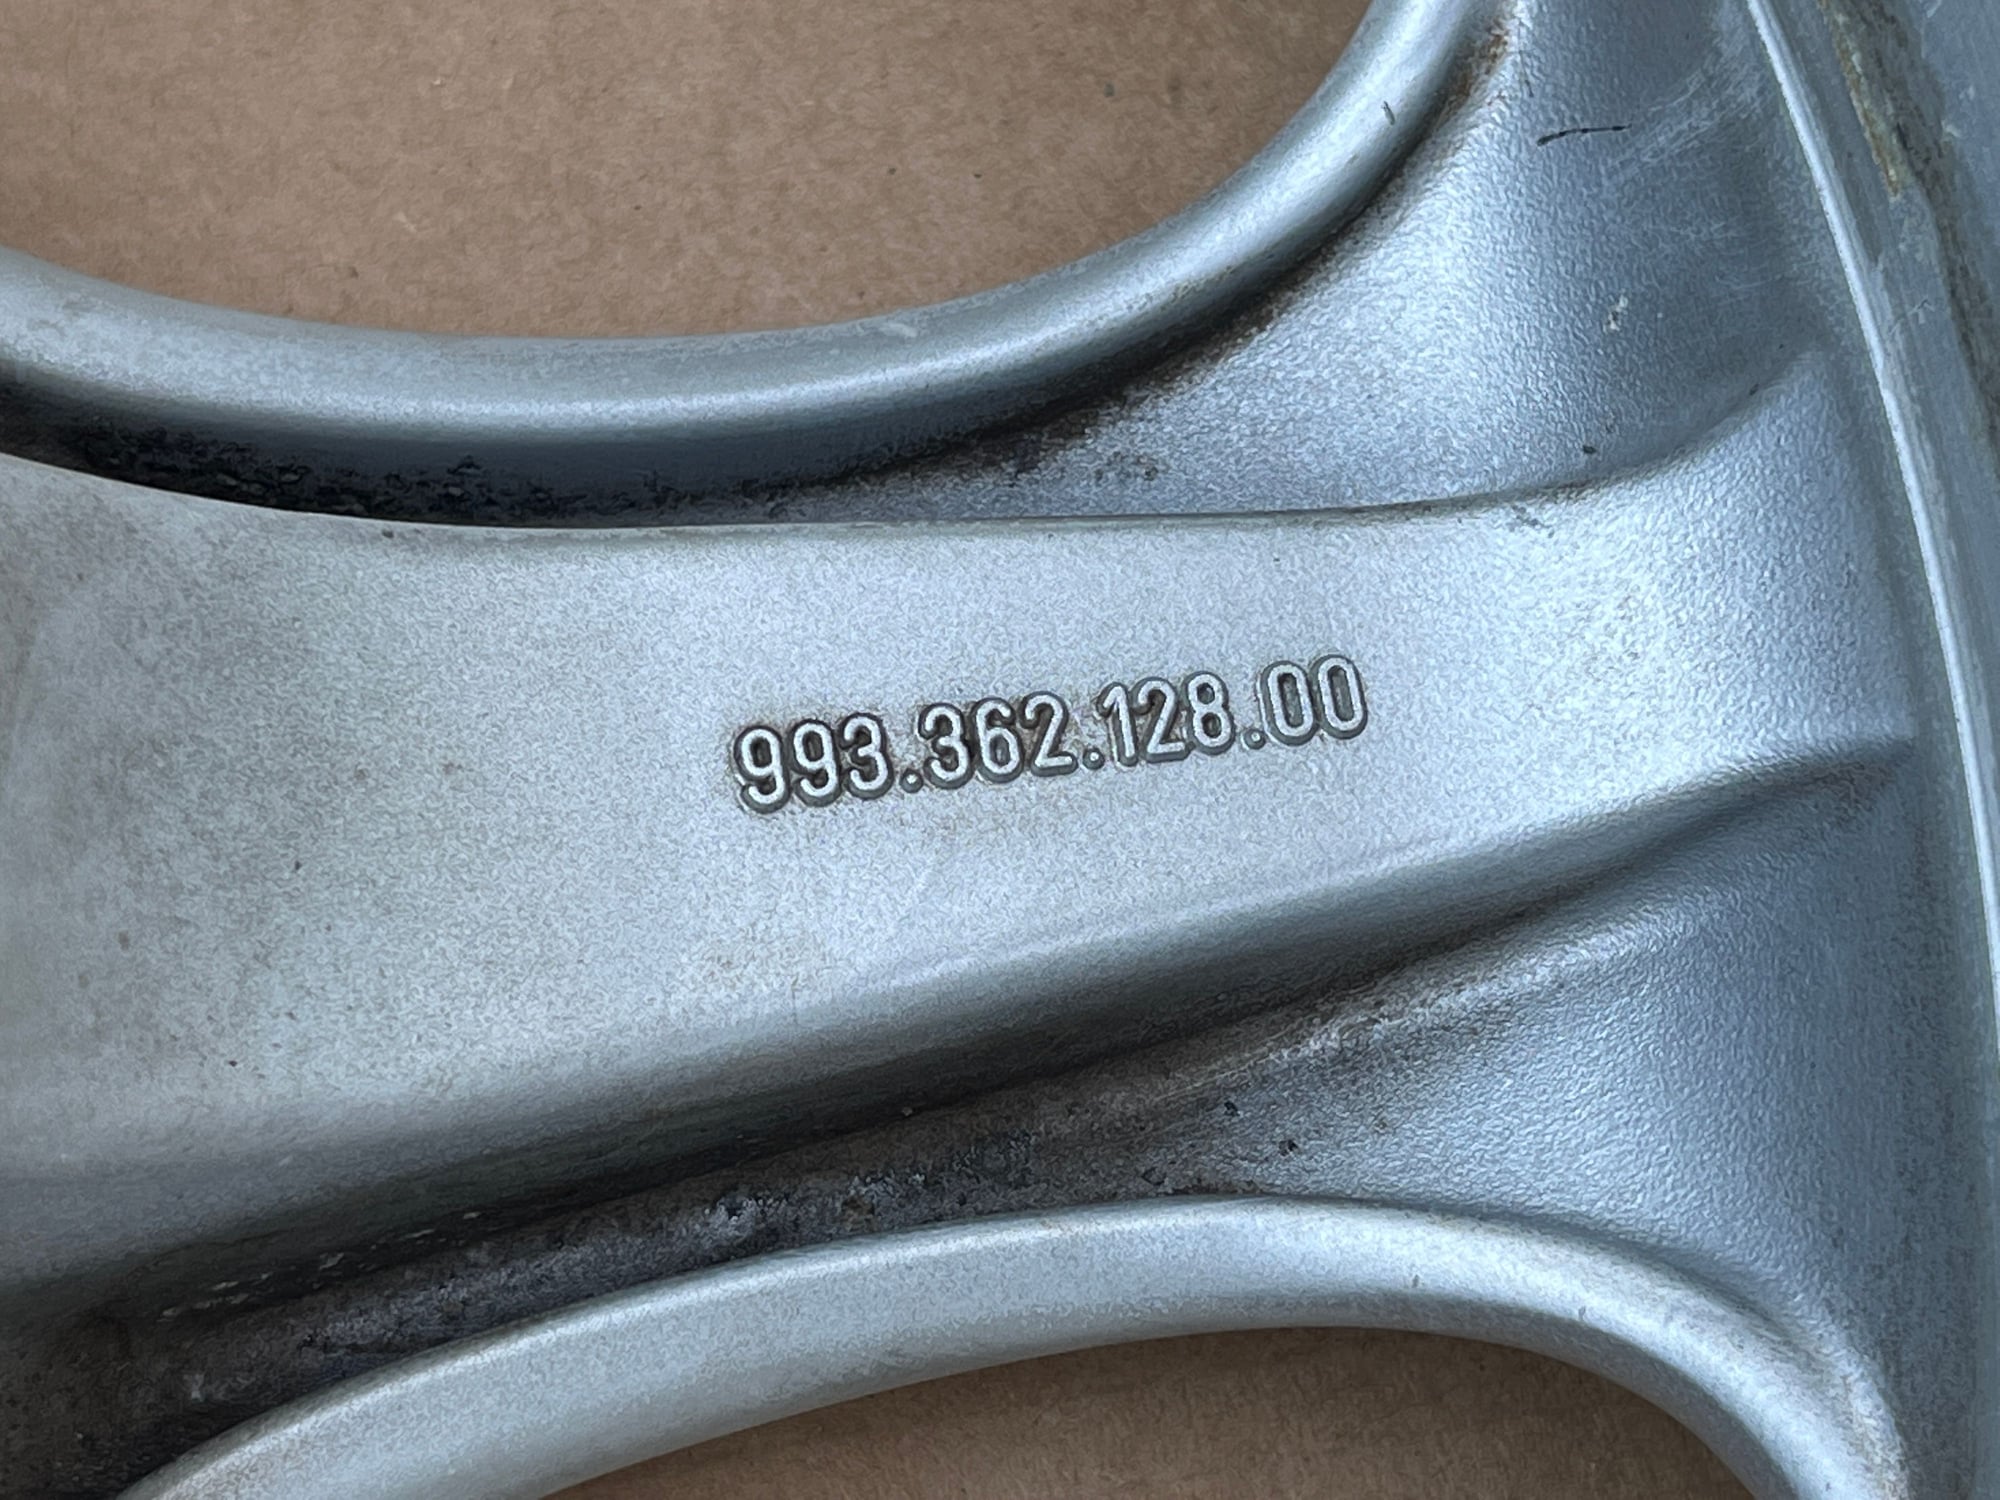 Wheels and Tires/Axles - 993/968 Cup 2 OEM wheels 17" - Used - 1989 to 1997 Porsche 911 - All Years Porsche 968 - Dallas, TX 75218, United States